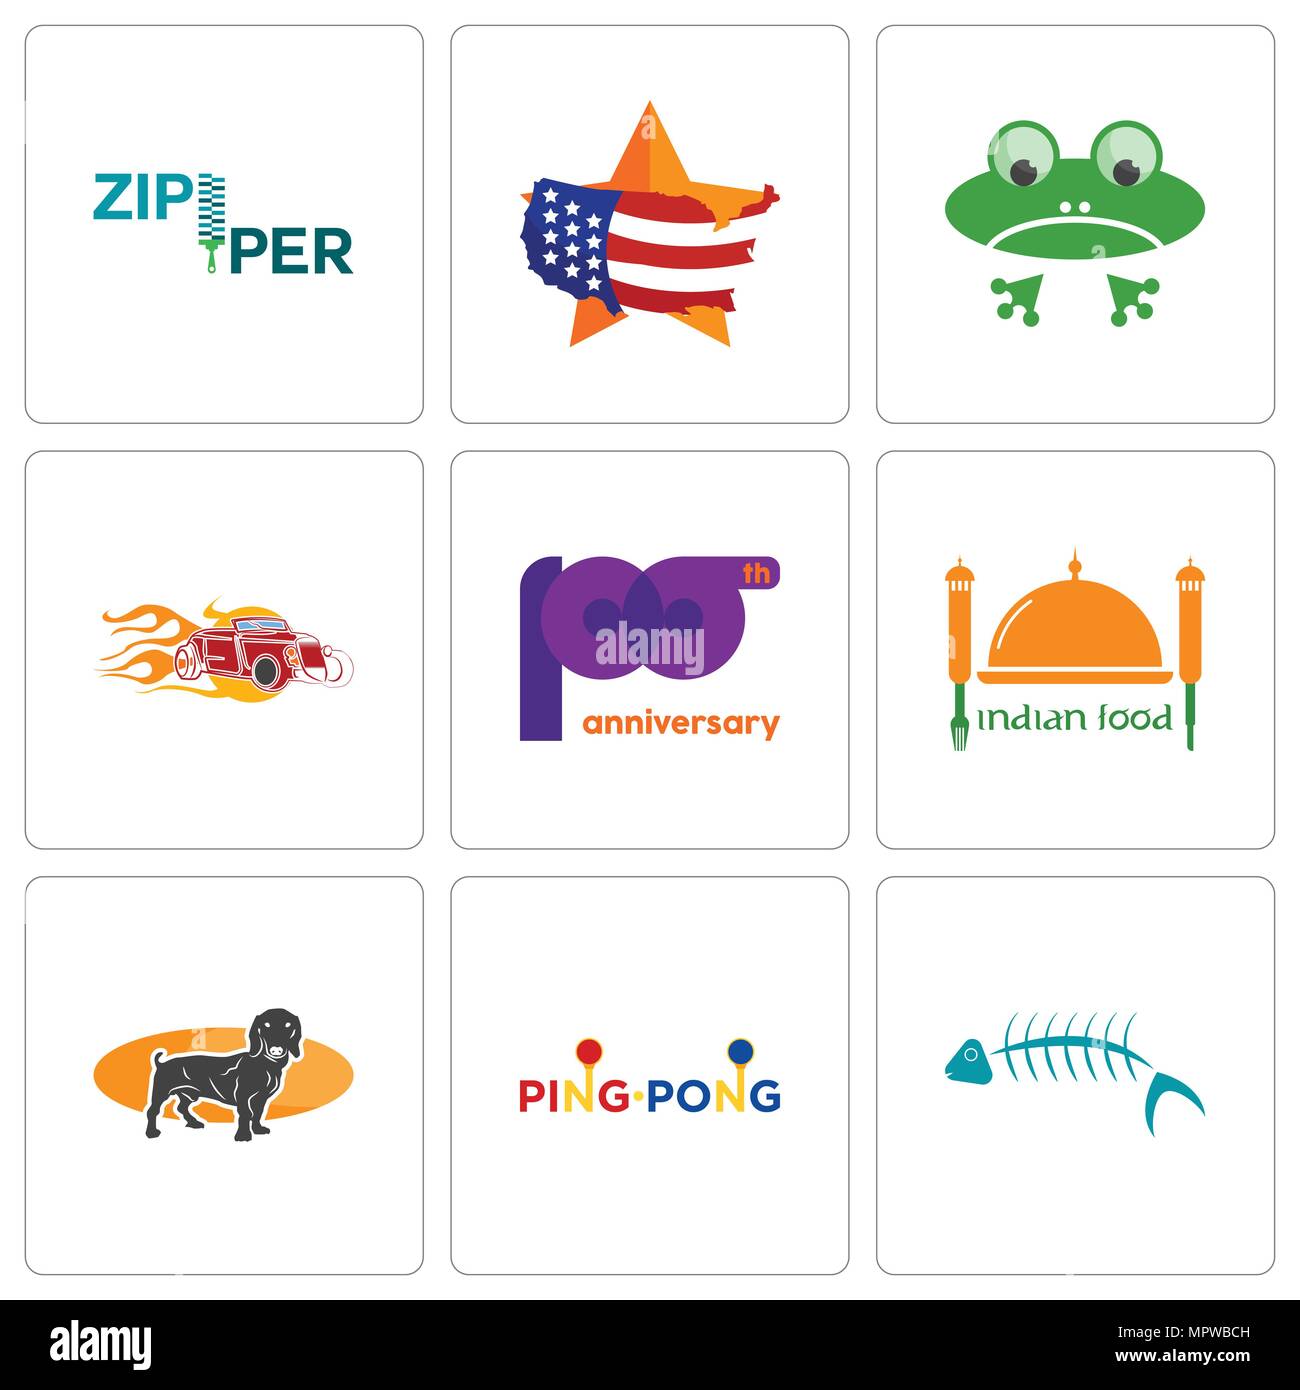 Can you help me with the answers for this logo game